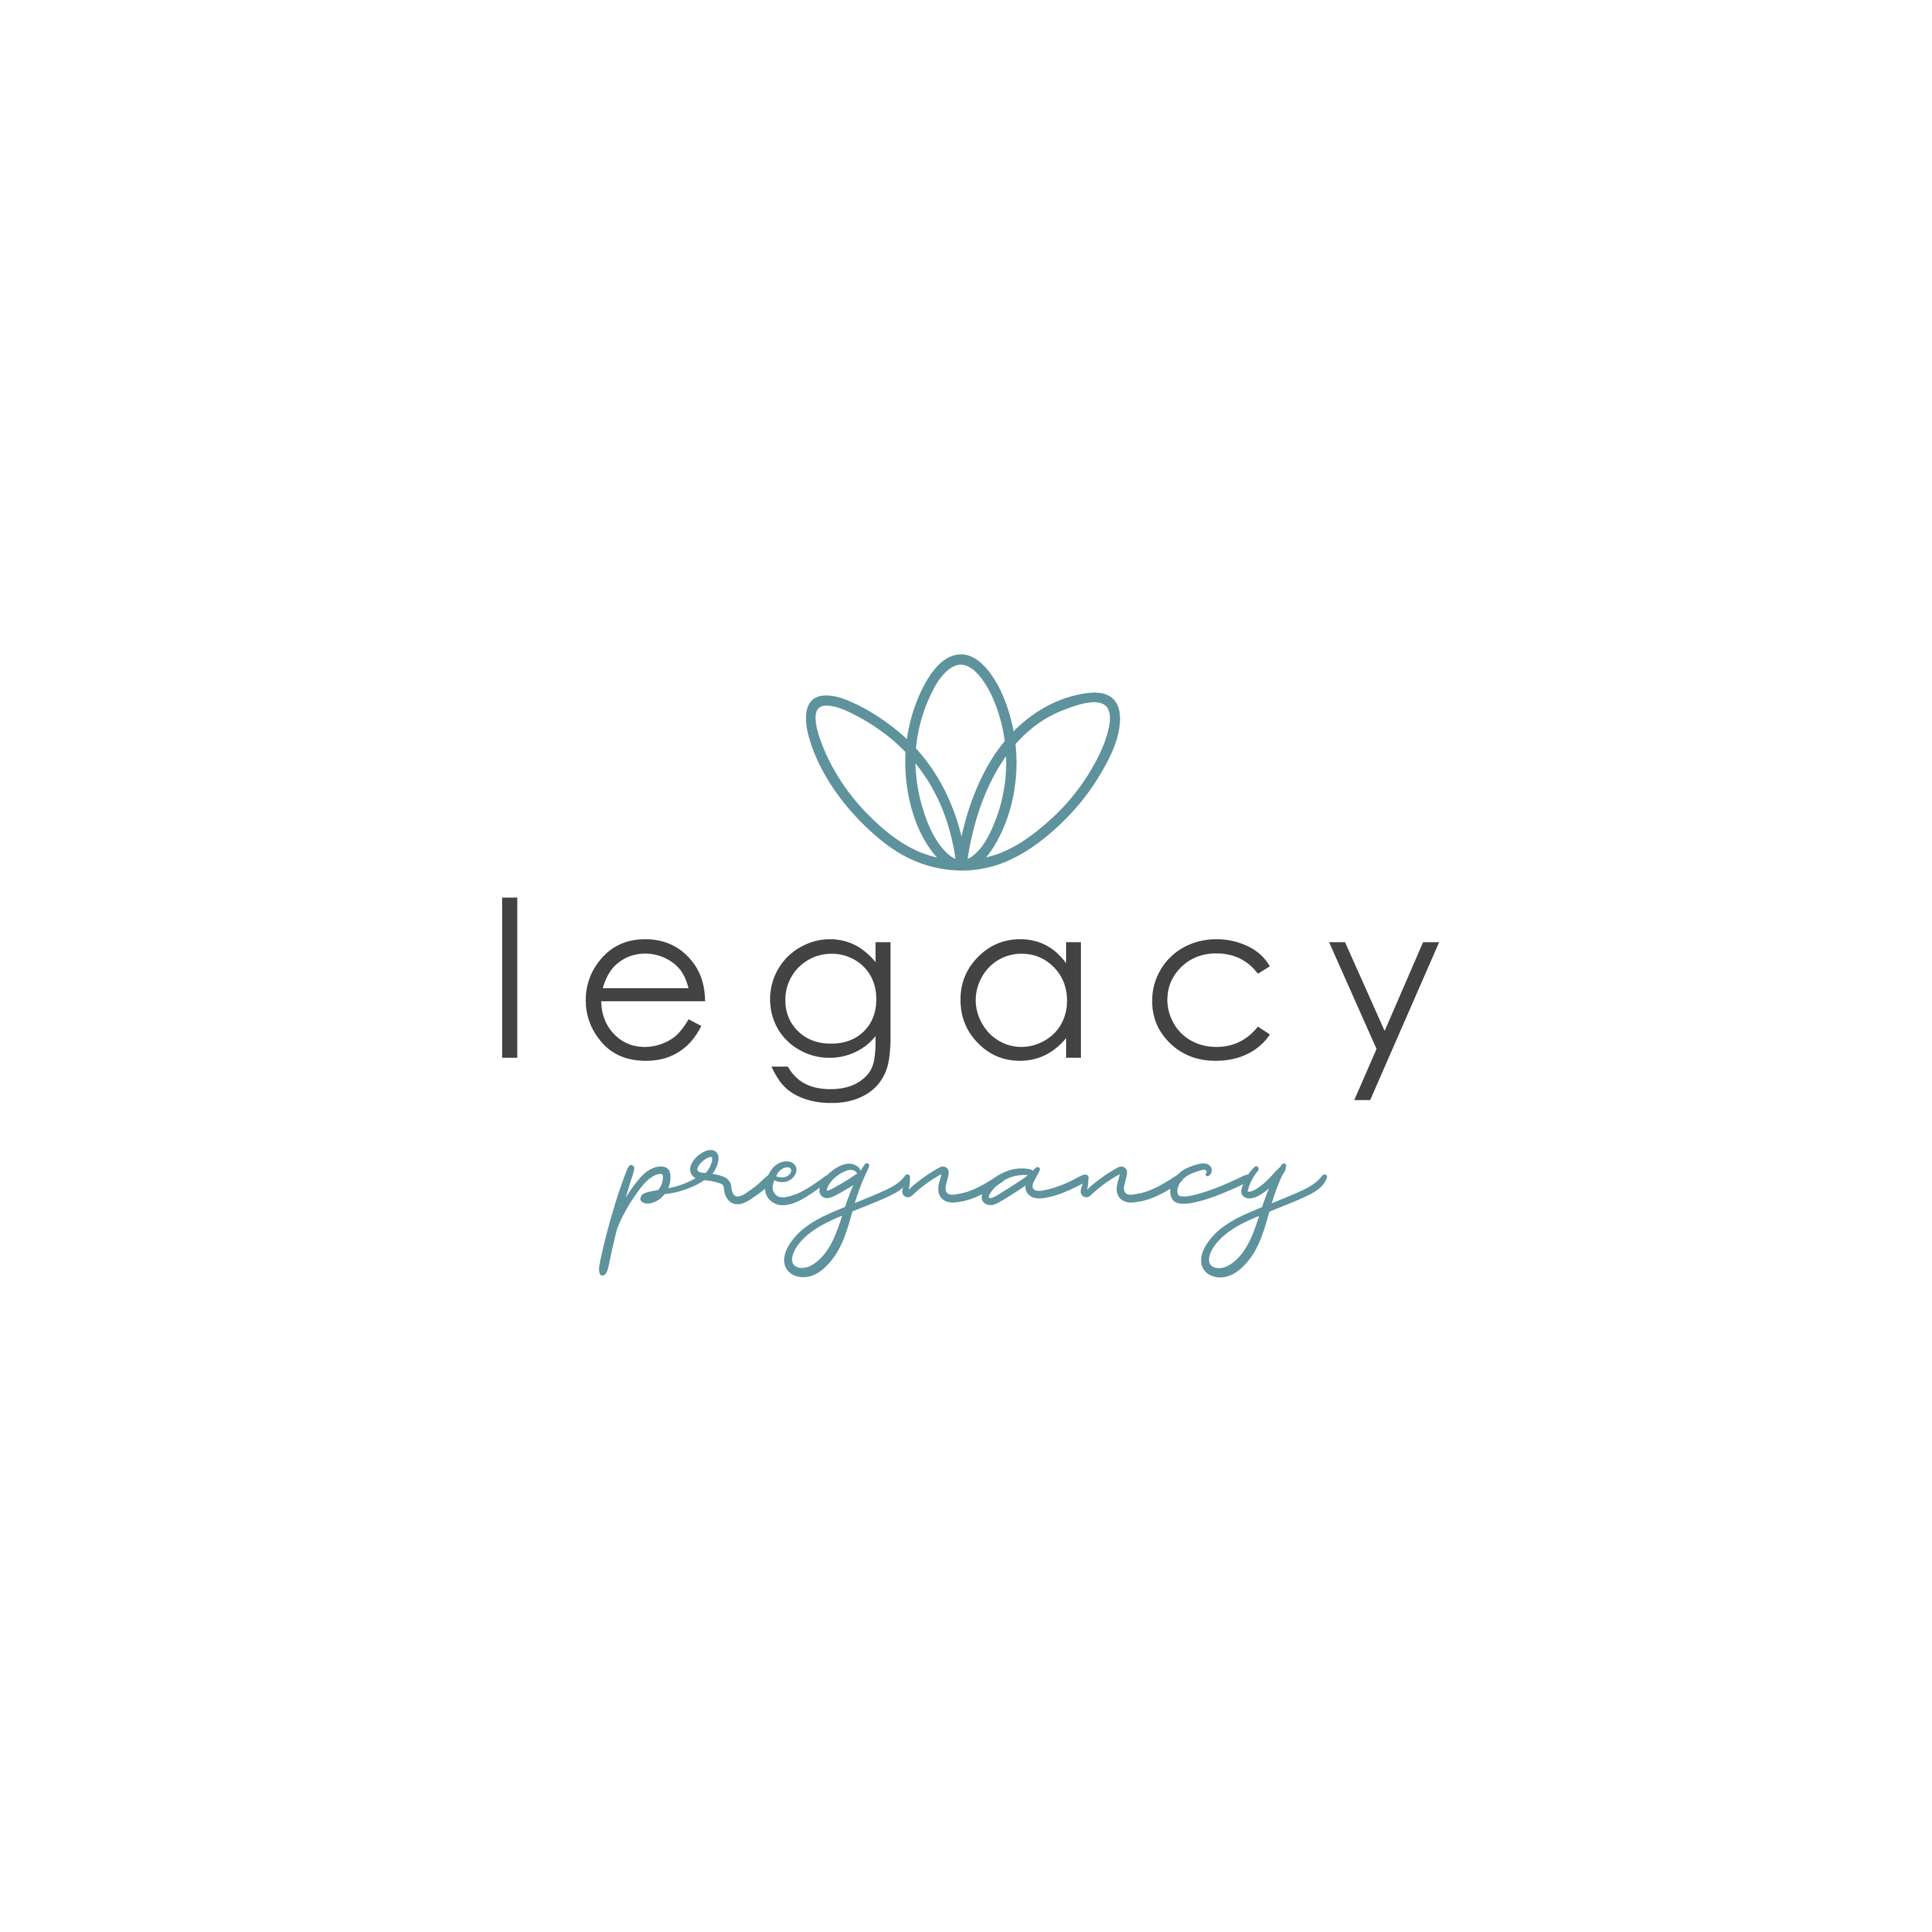    Legacy Pregnancy Consulting